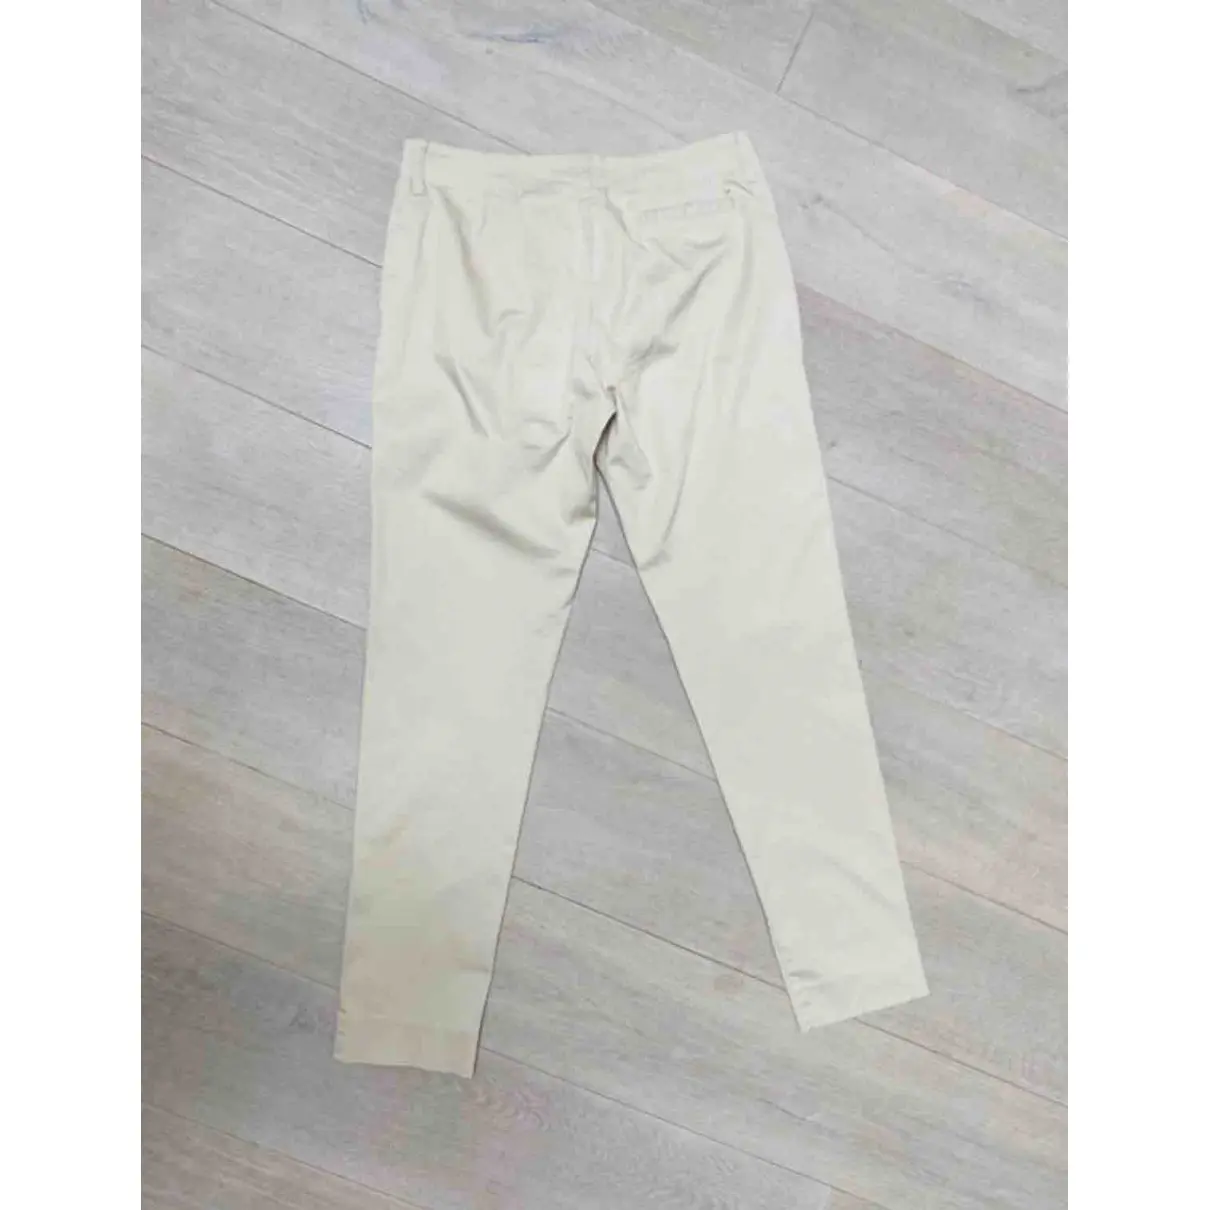 Buy Armani Jeans Chino pants online